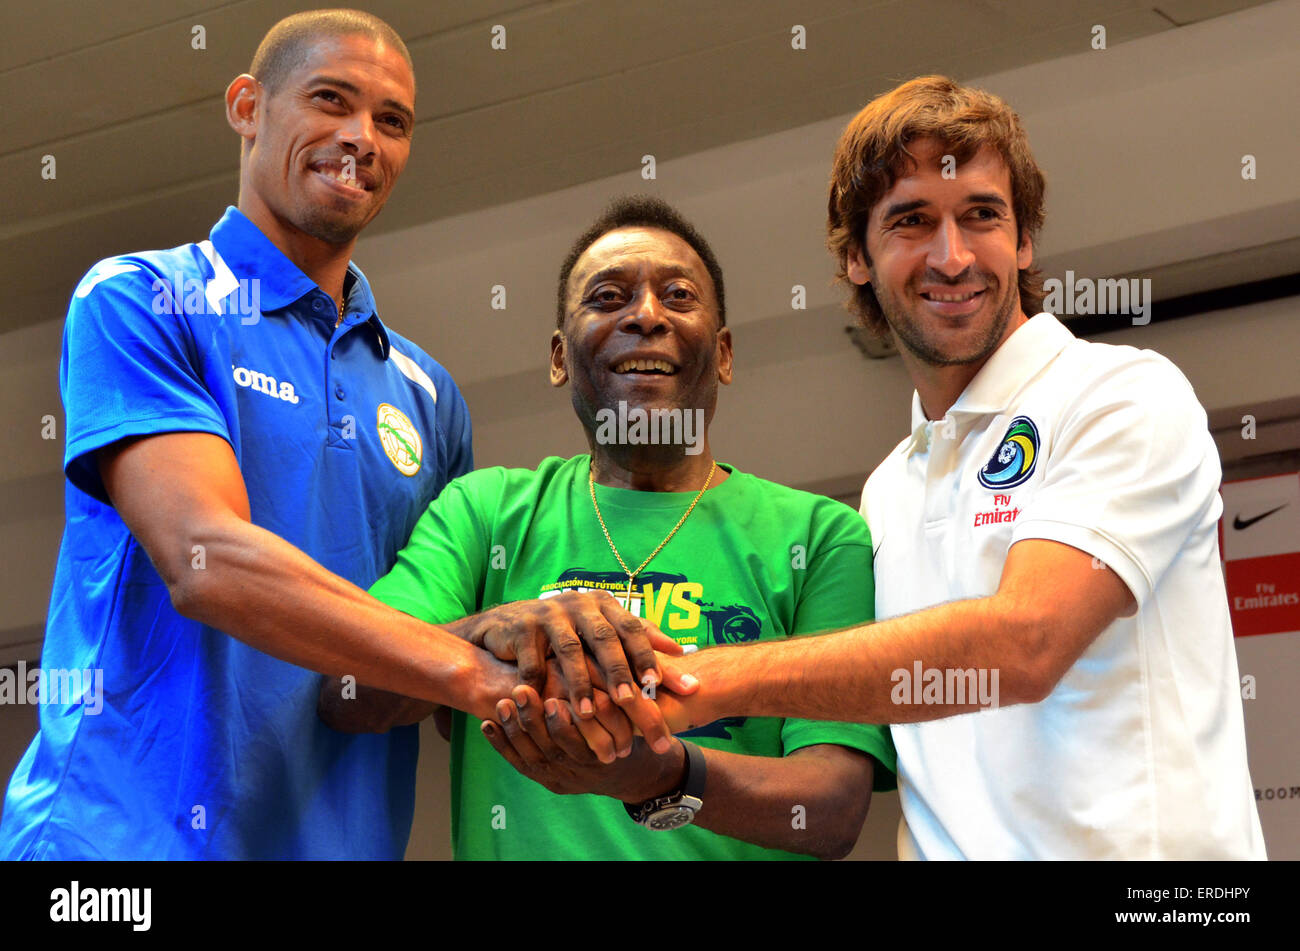 Havana, Cuba. 1st June, 2015. Former Brazilian soccer player Edson Arantes do Nascimento (C), better known as Pele, New York Cosmos' player Raul Gonzalez (R) of Spain and Cuban player Yenier Marquez pose for photos at a press conference in Havana, Cuba, on June 1, 2015. The New York Cosmos of the United States will play Cuba's national team on Tuesday here, becoming the first US sports team to play in Cuba in 16 years and kicking off a new era in the bilateral sports relations. Credit:  Joaquin Hernandez/Xinhua/Alamy Live News Stock Photo